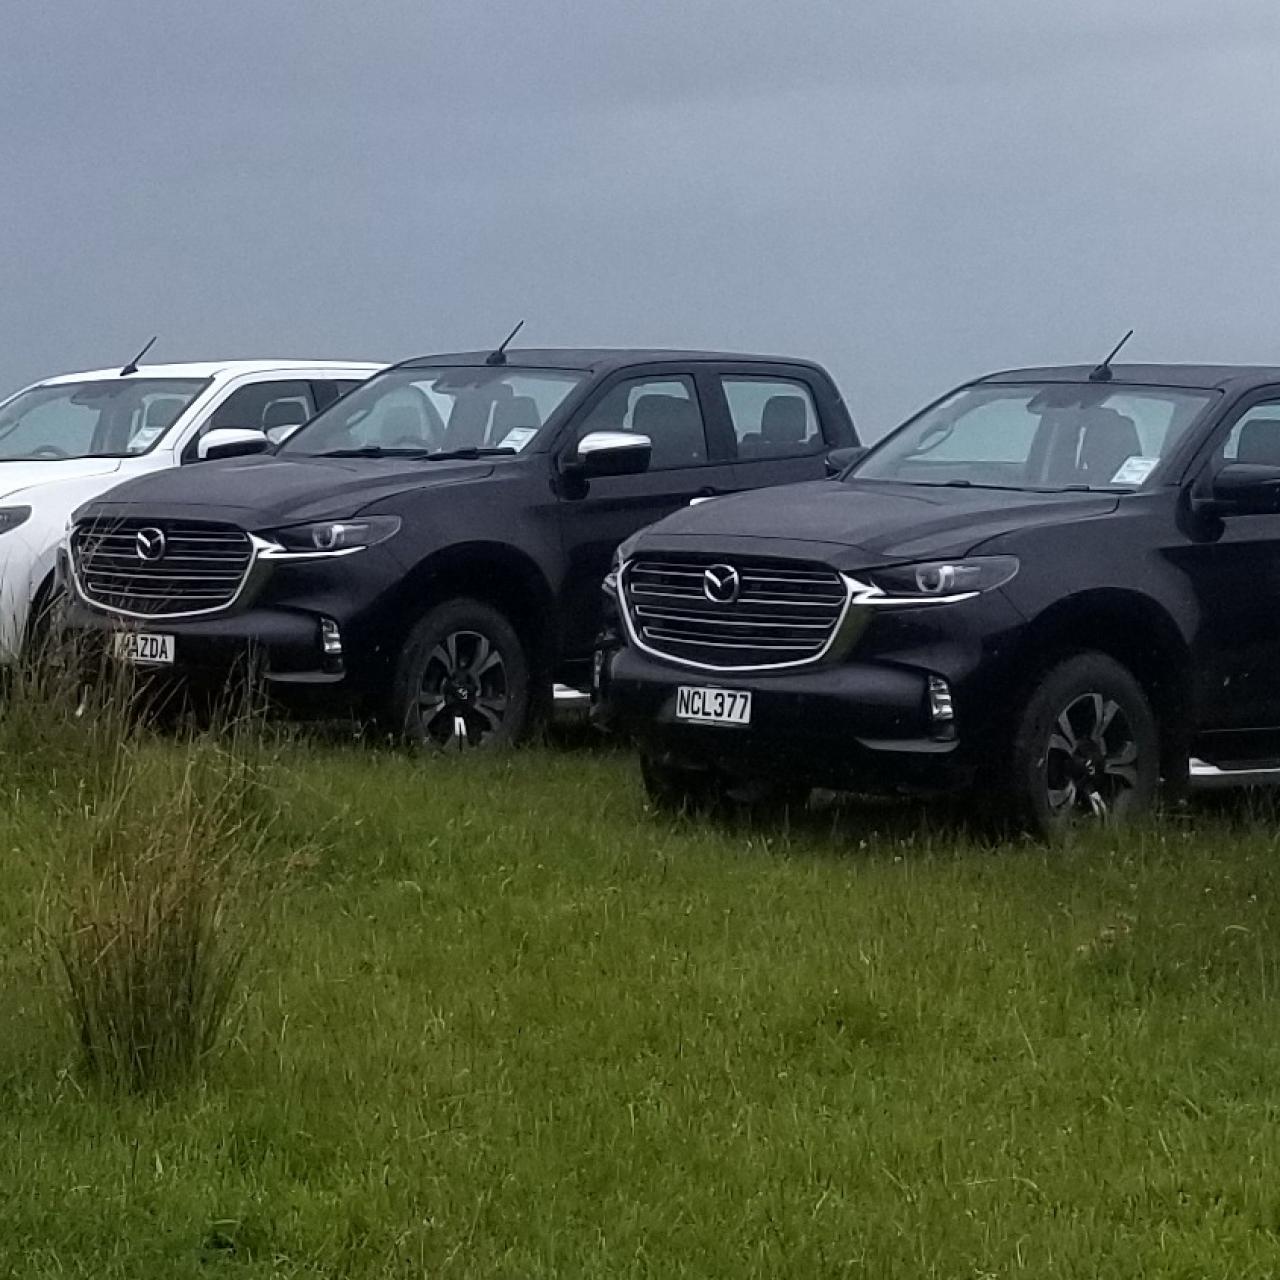 Mazda launches all-new BT-50 ute